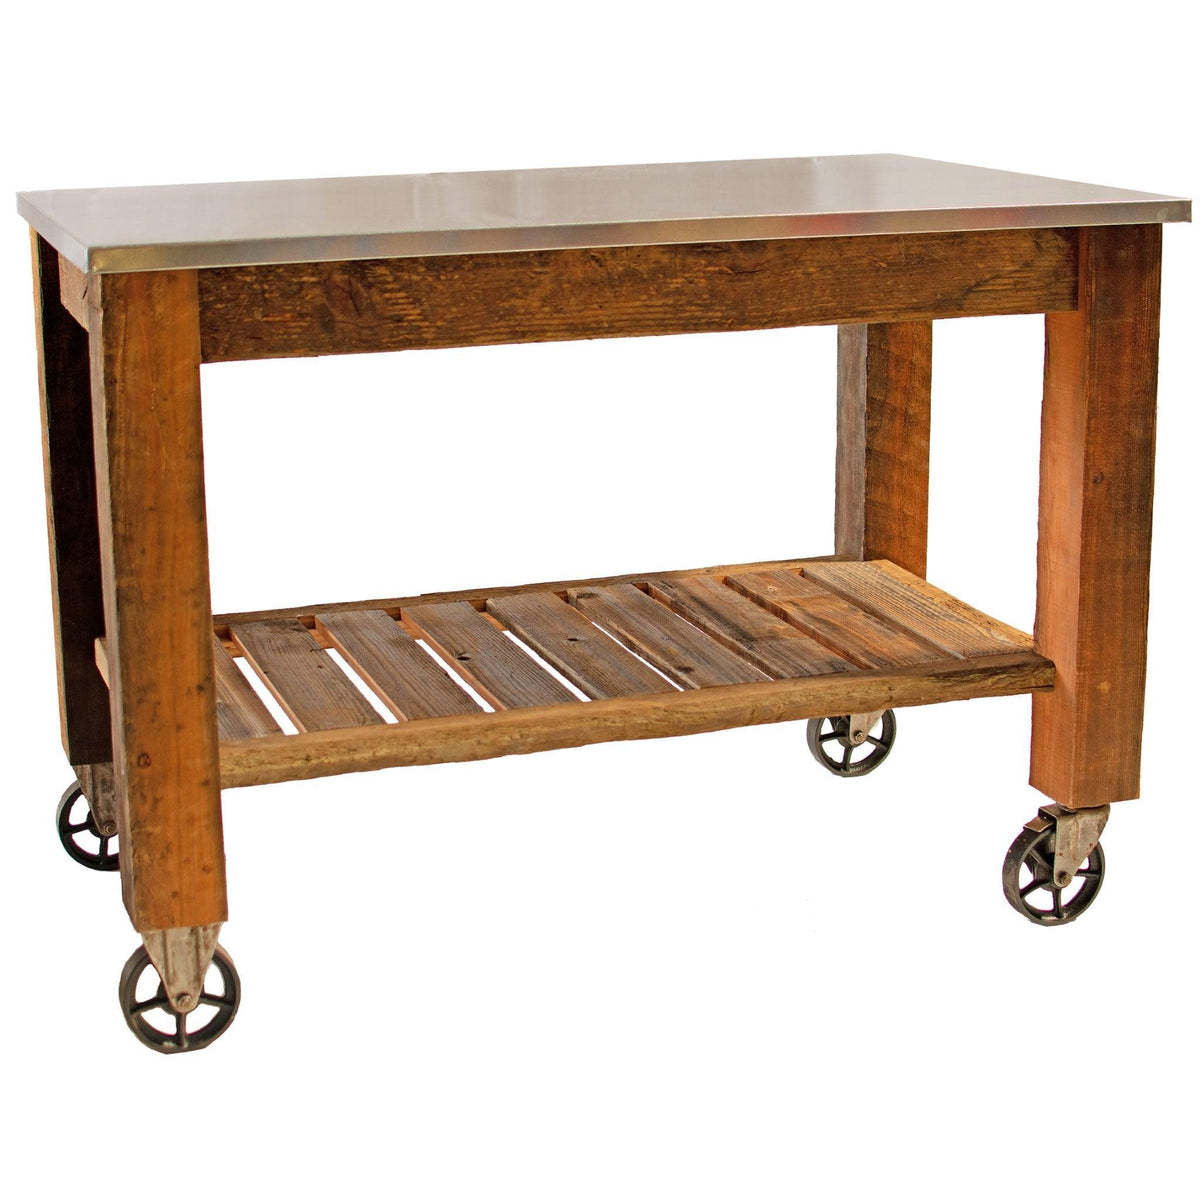 Lee Display's Redwood Potting Table Rolling Cart with 6in Vintage Casters without Hardware Included on sale now at leedisplay.com